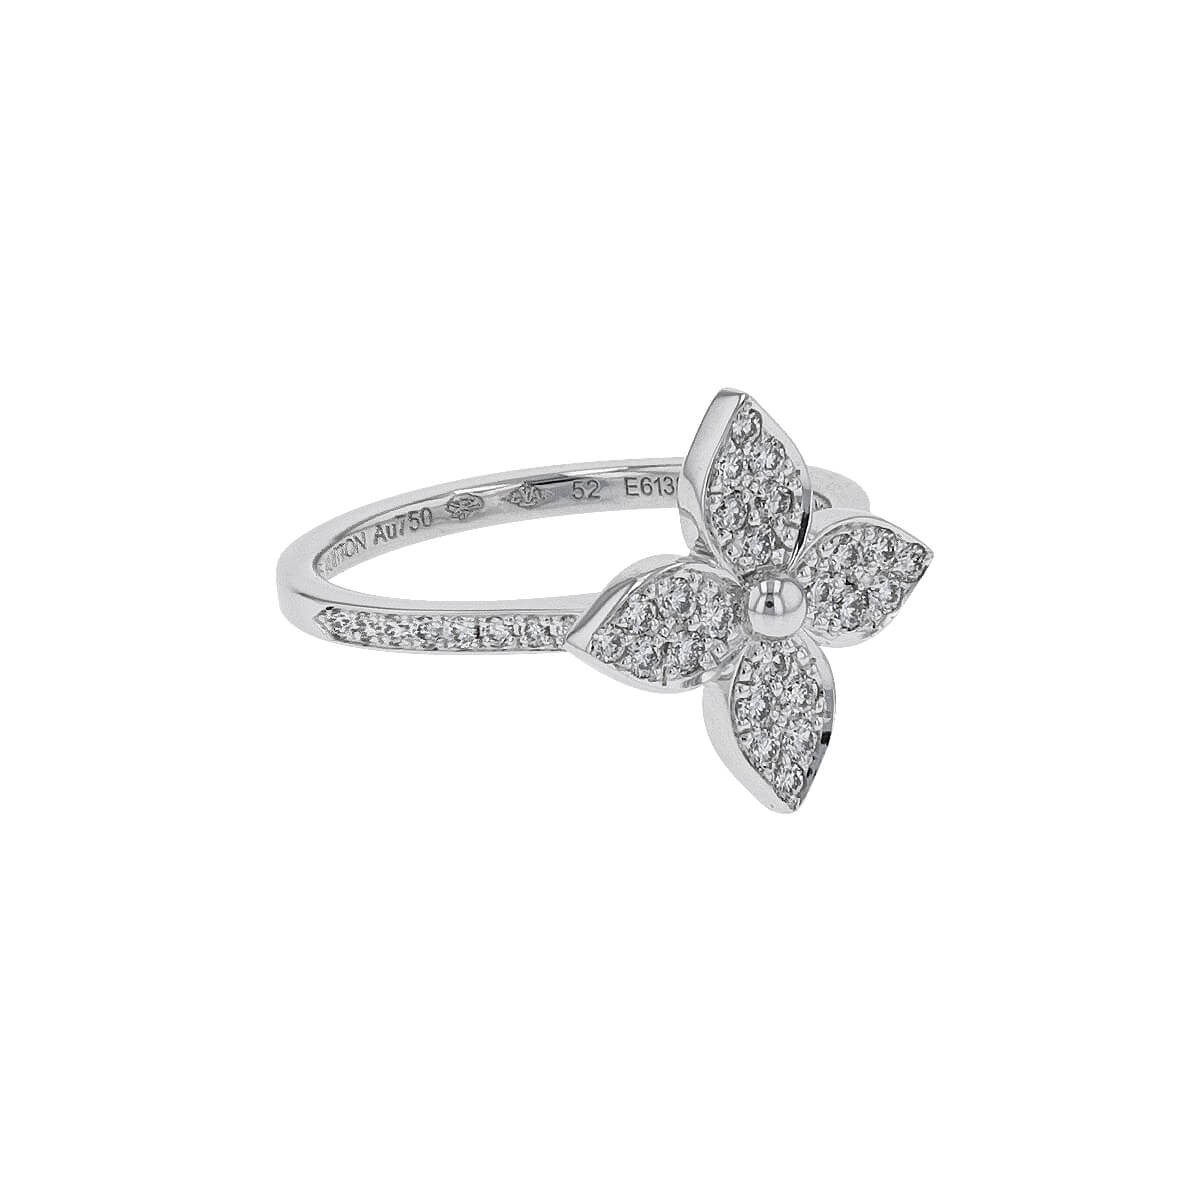 Louis Vuitton Star Blossom Ring, White Gold and Diamonds Grey. Size 53